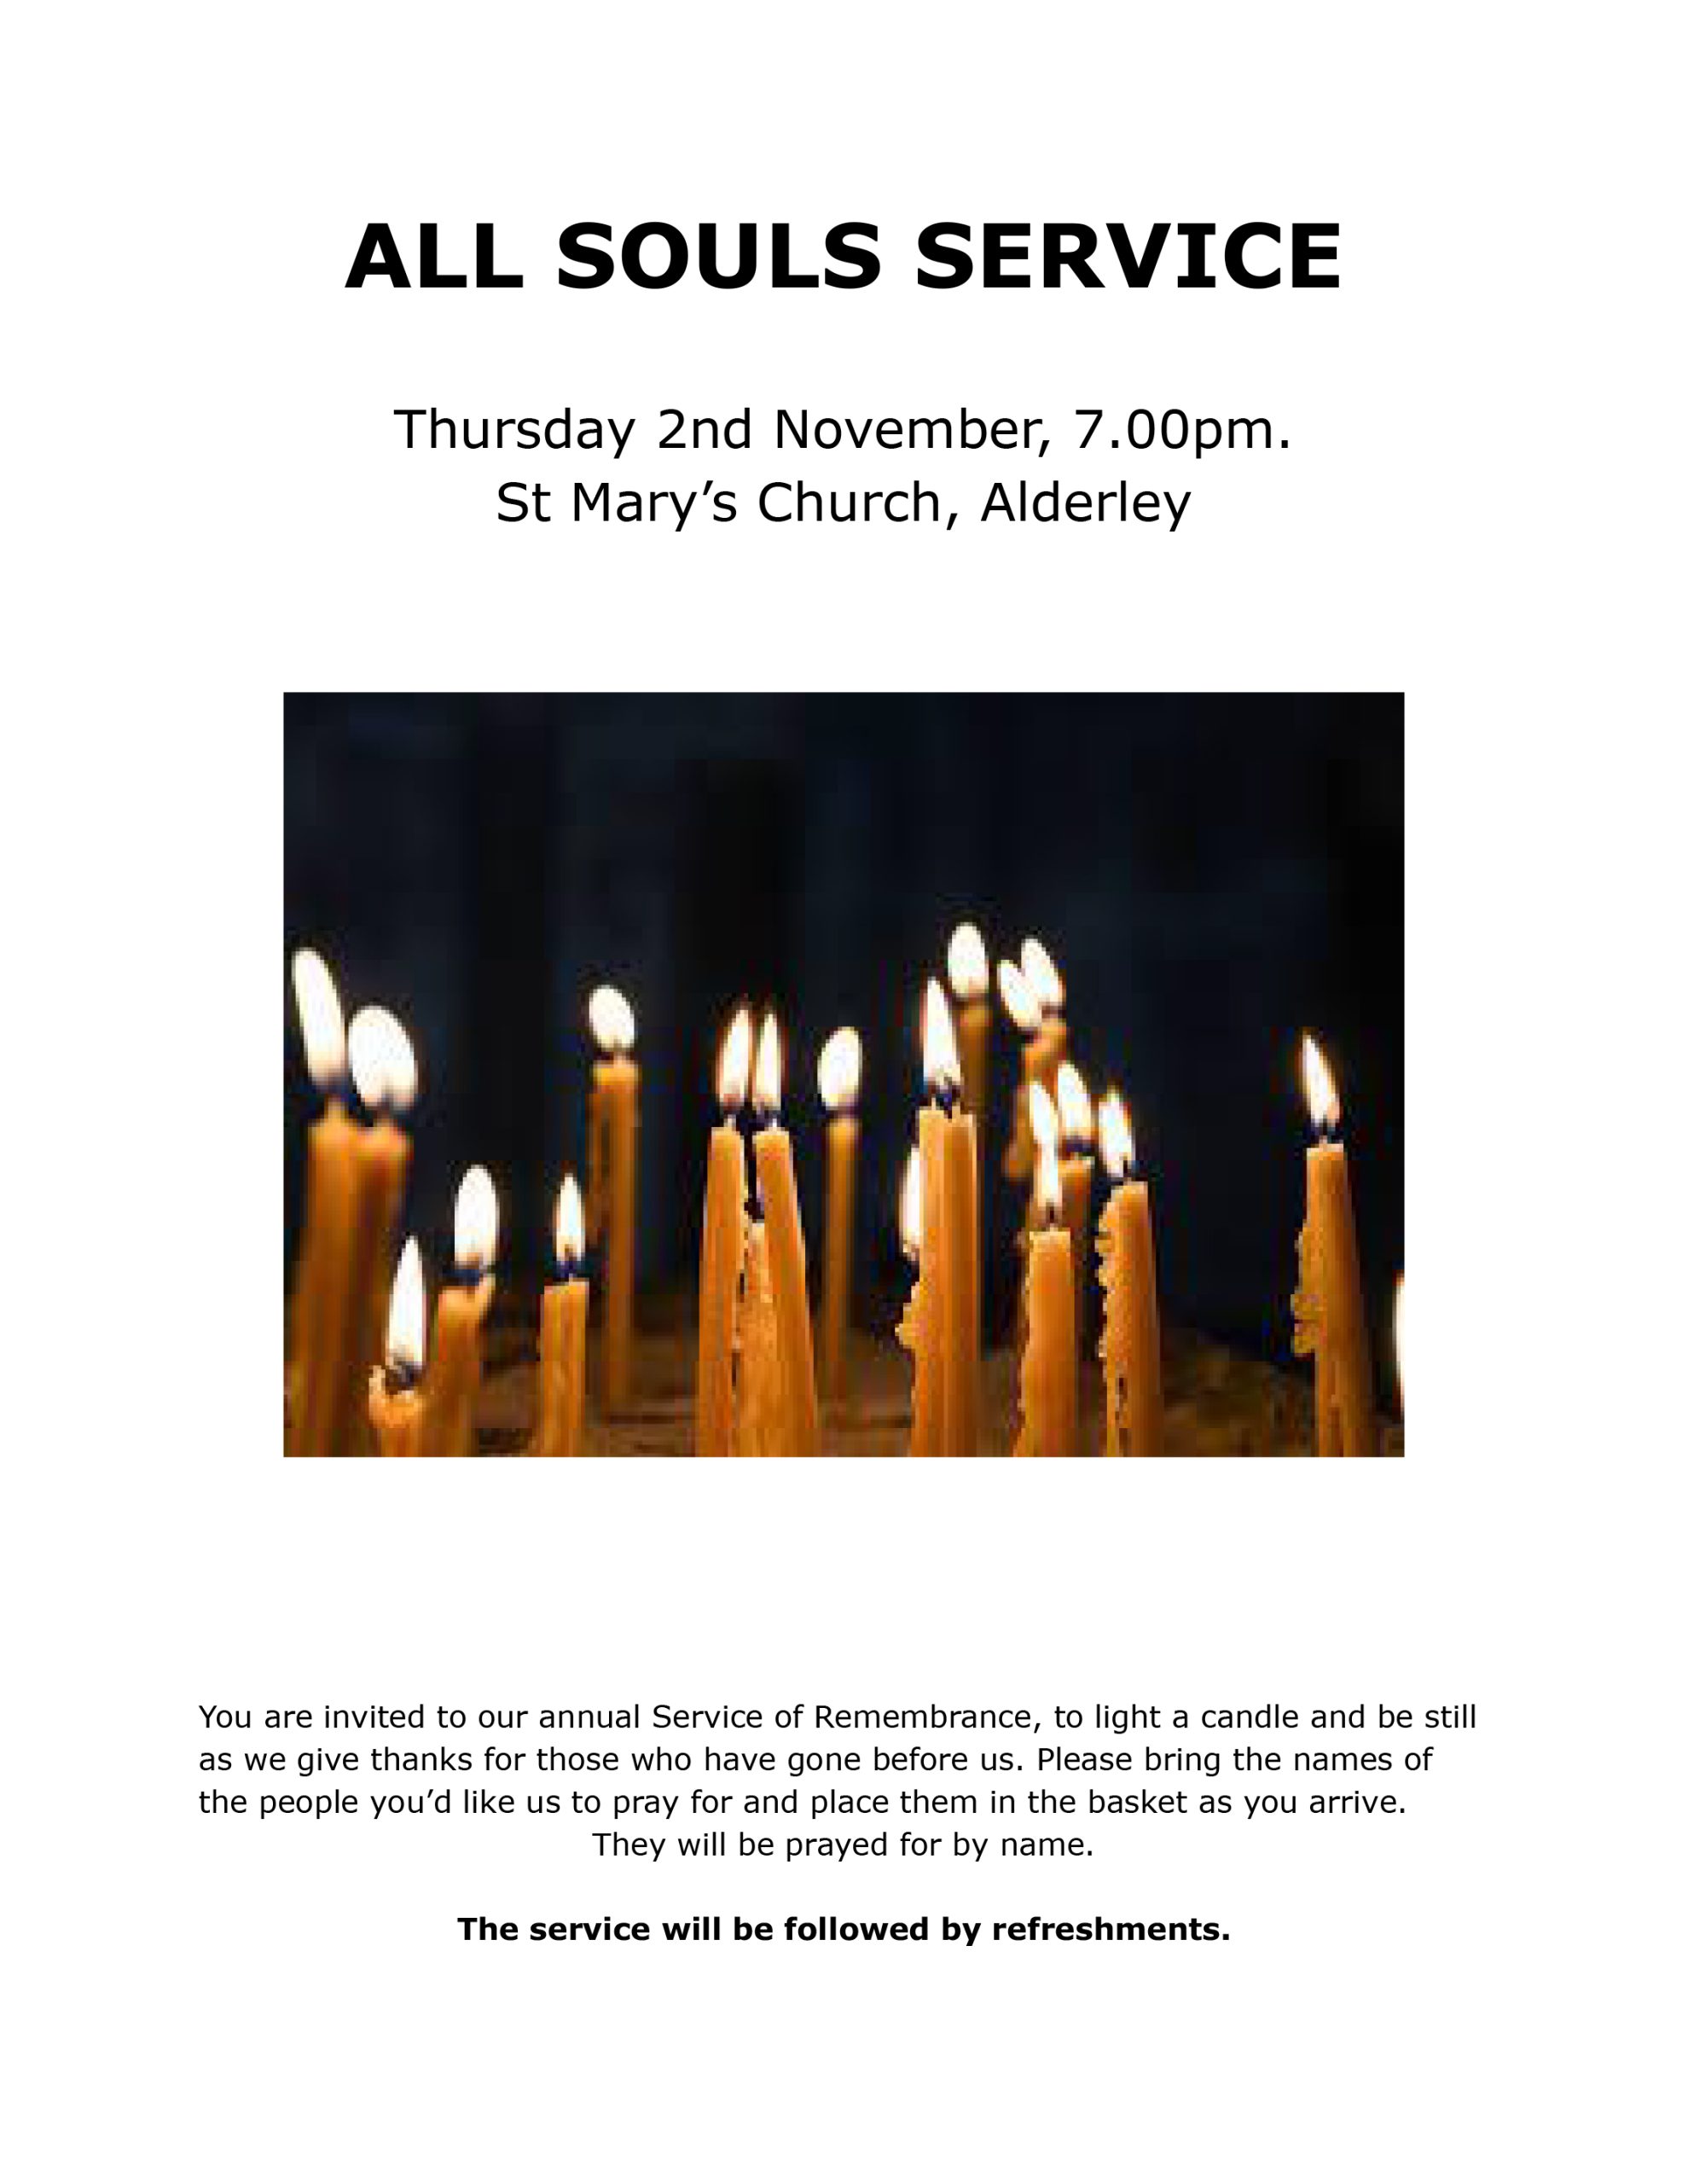 All Souls Annual Service of Remembrance         St Mary’s Church Nether Alderley 2nd November 7pm